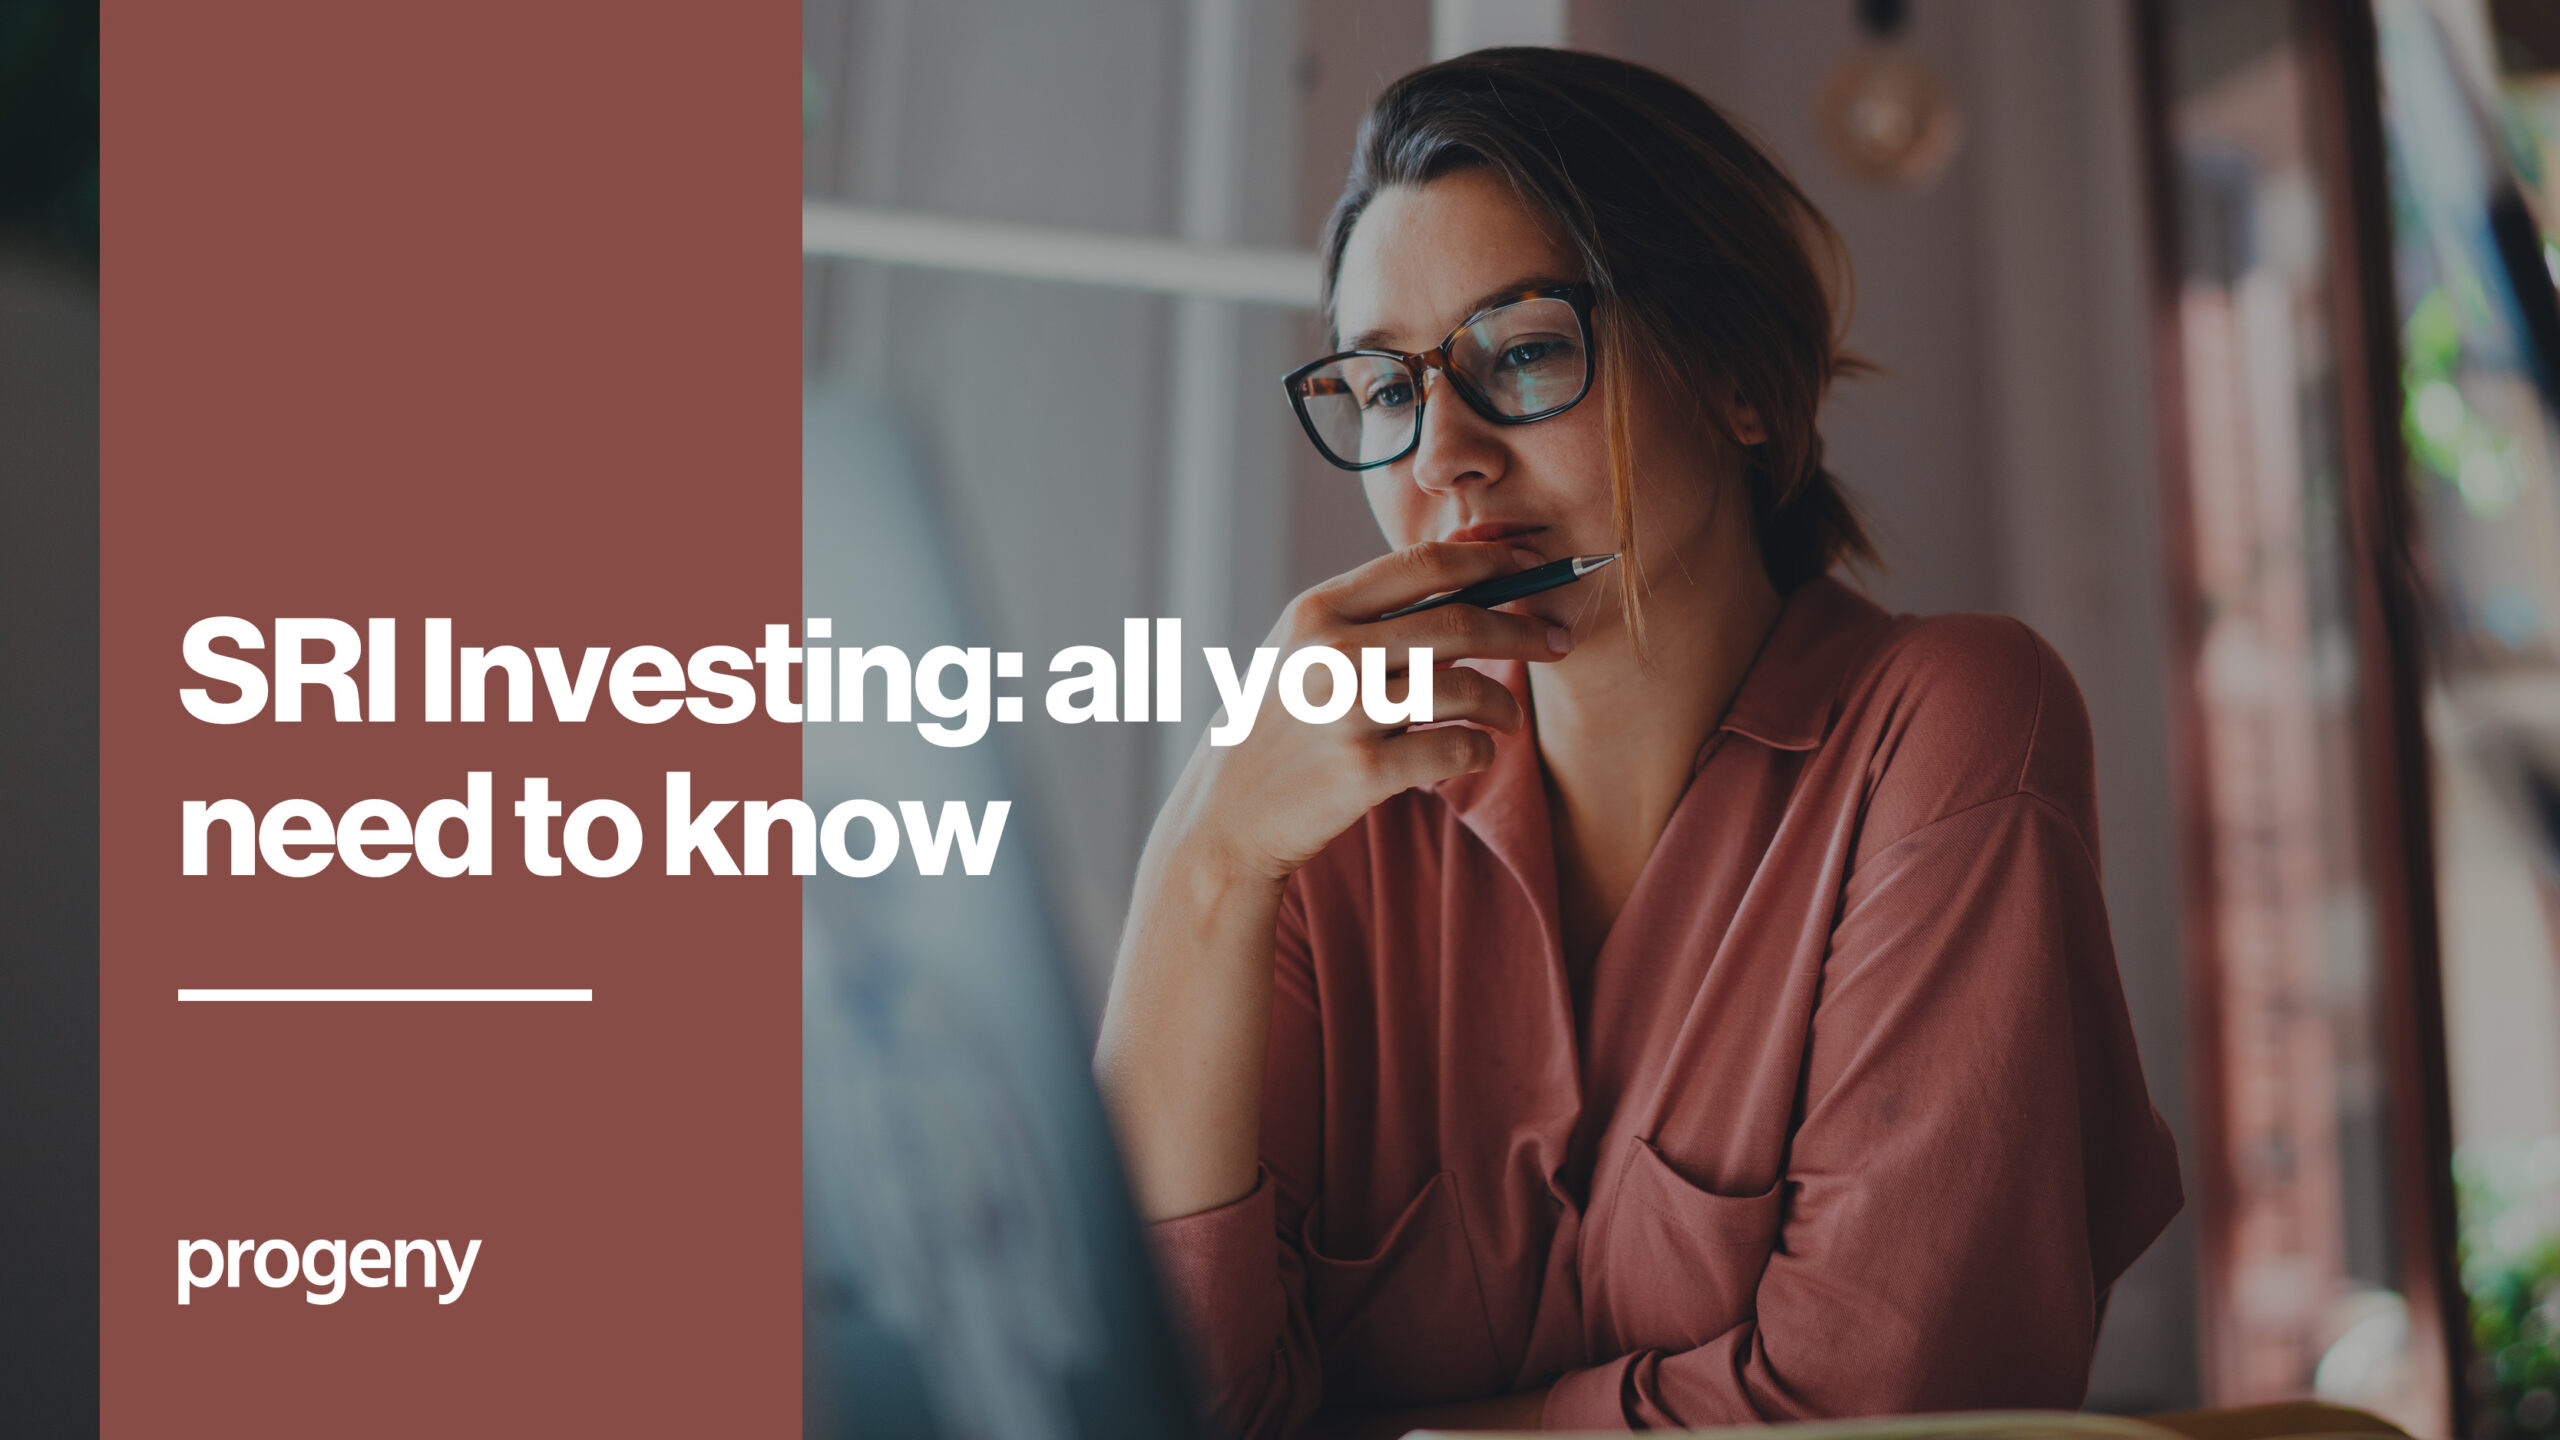 SRI Investing- all you need to know